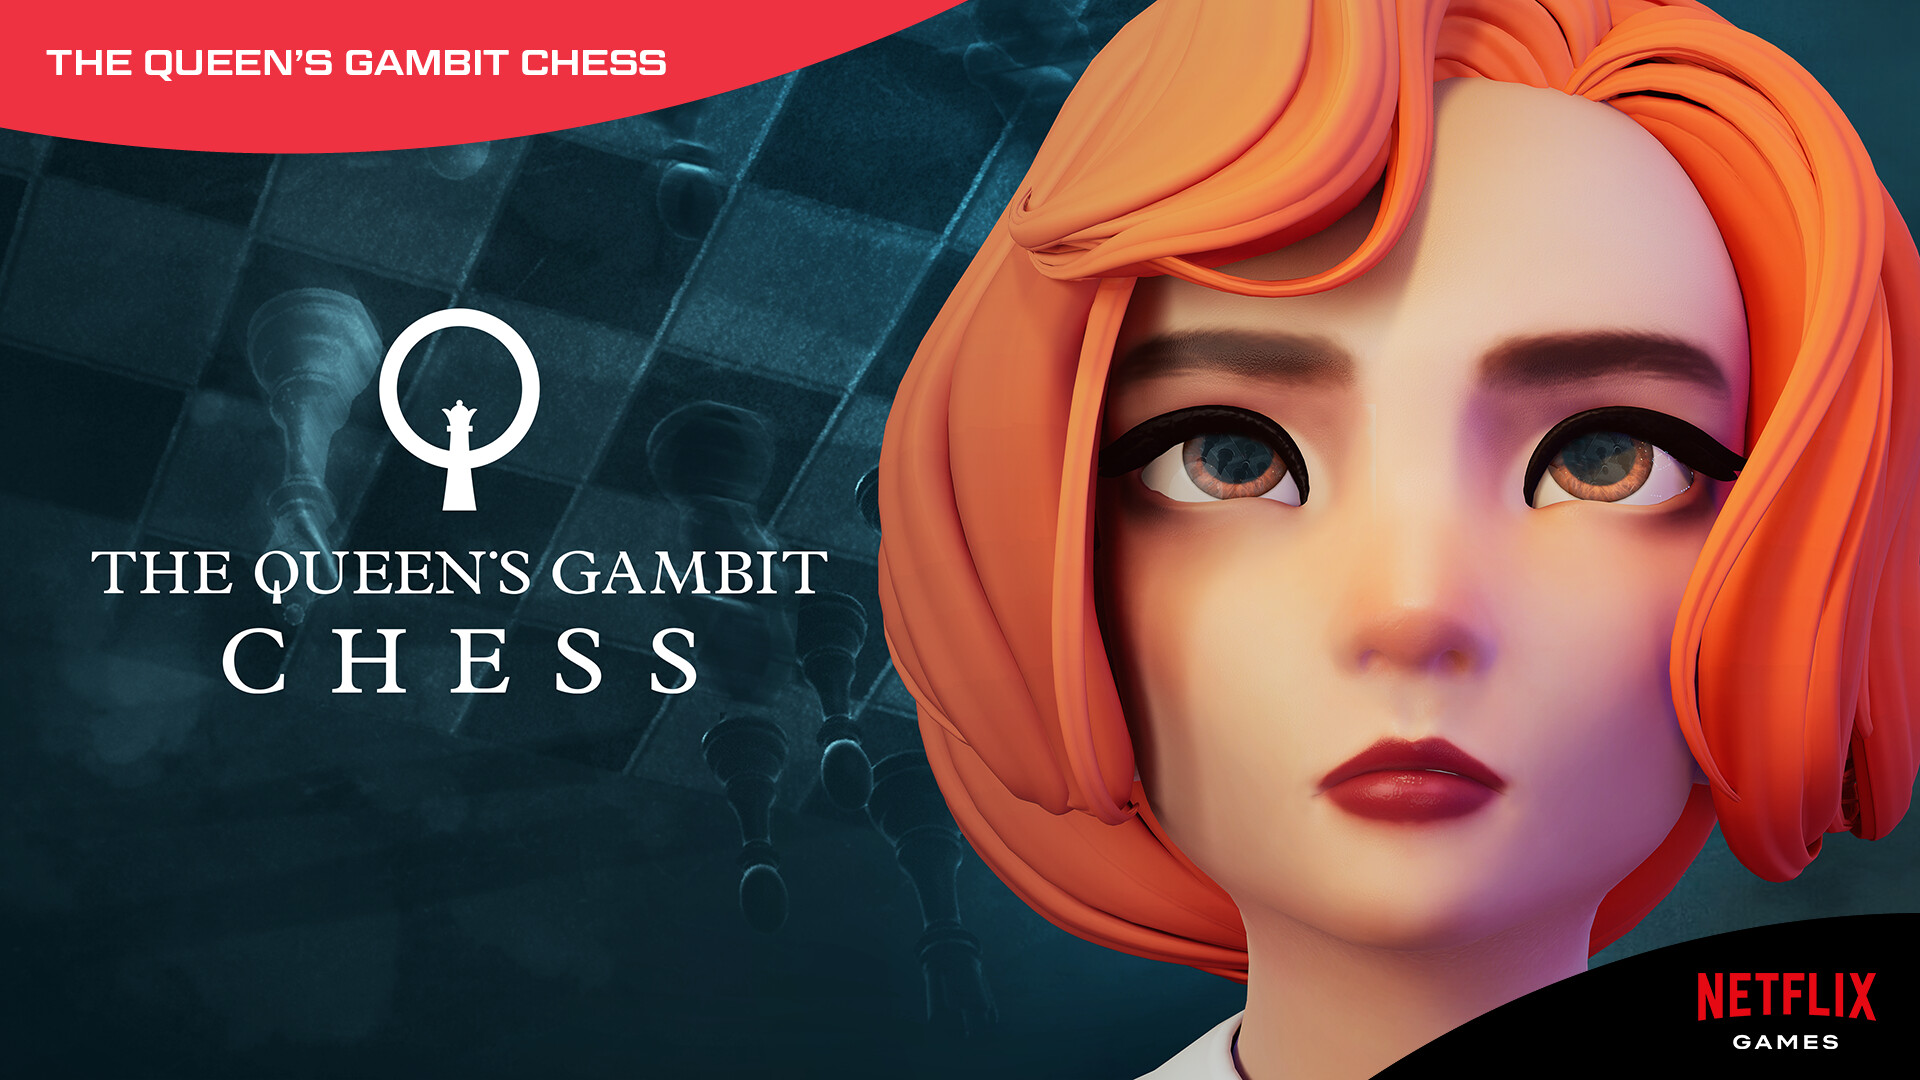 The Story Behind Beth Harmon's Red Hair in The Queen's Gambit